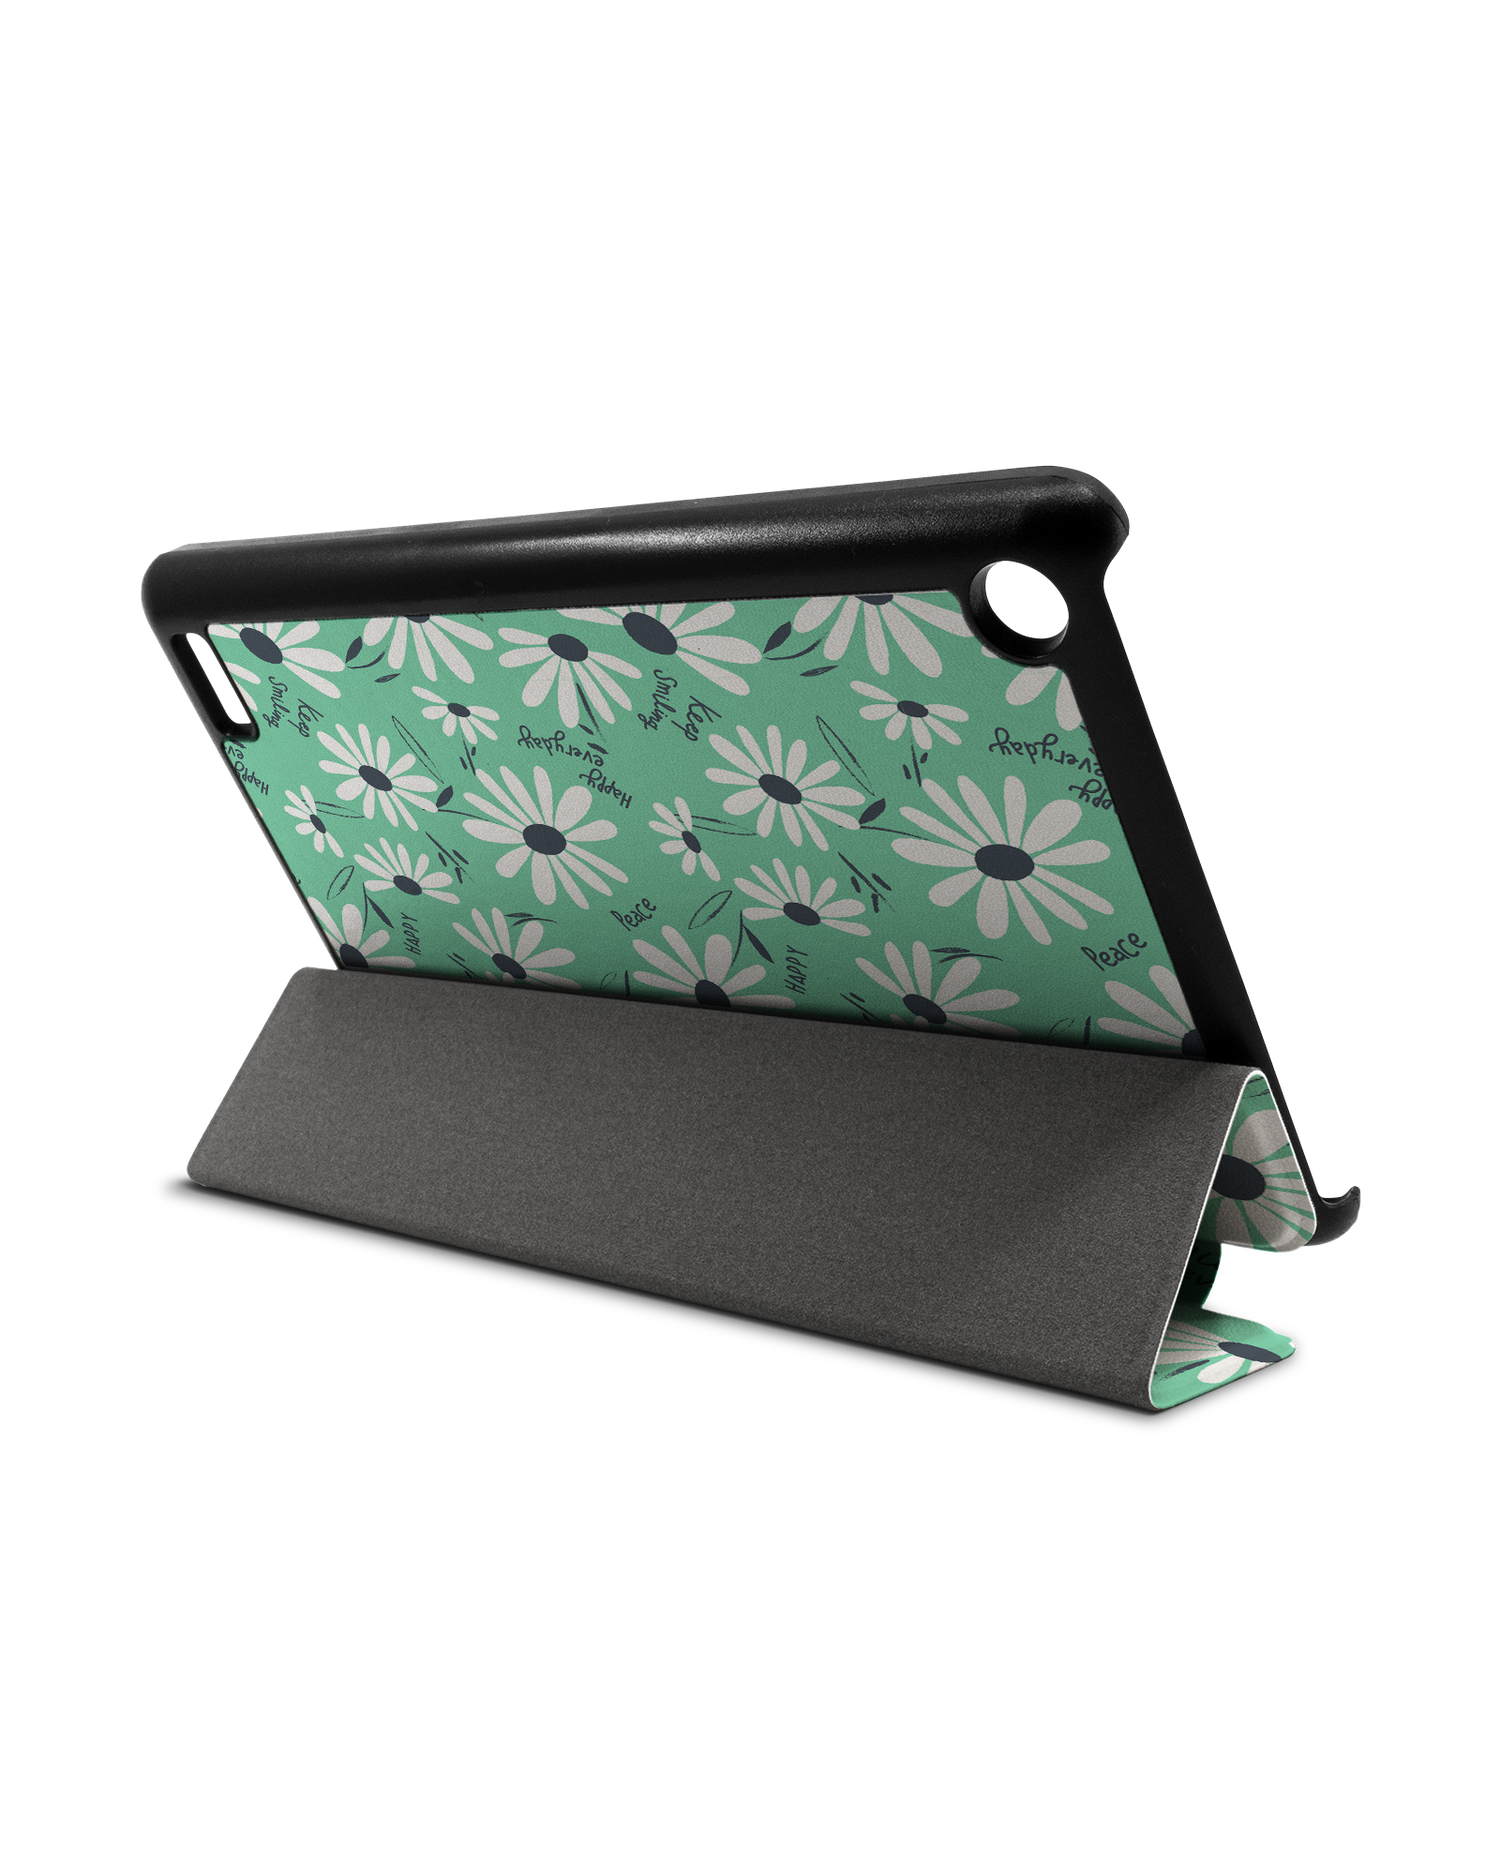 Positive Daisies Tablet Smart Case for Amazon Fire 7: Used as Stand